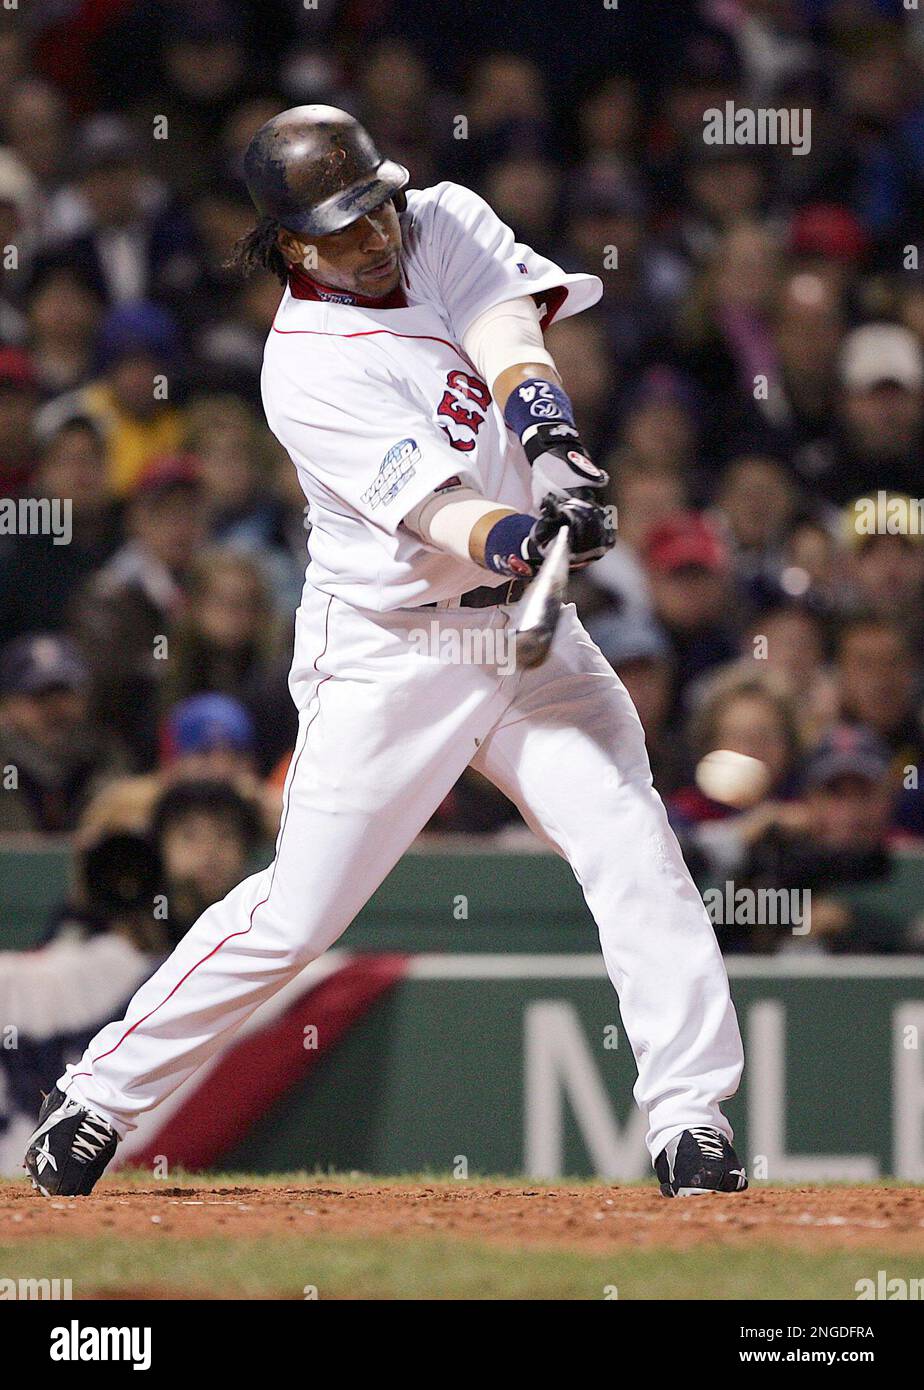 Boston Red Sox's Manny Ramirez hits into a fielder's choice in the third inning against the St. Louis Cardinals in Game 1 of the World Series Saturday, Oct. 23, 2004 in Boston. The Sox won 11-9. Brilliant with the bat, bumbling in the field, the Red Sox outfielder was in his usual form for Game 1 of the World Series (news - web sites) on Saturday night when he singled three times and committed two errors (AP Photo/Charles Krupa) Banque D'Images